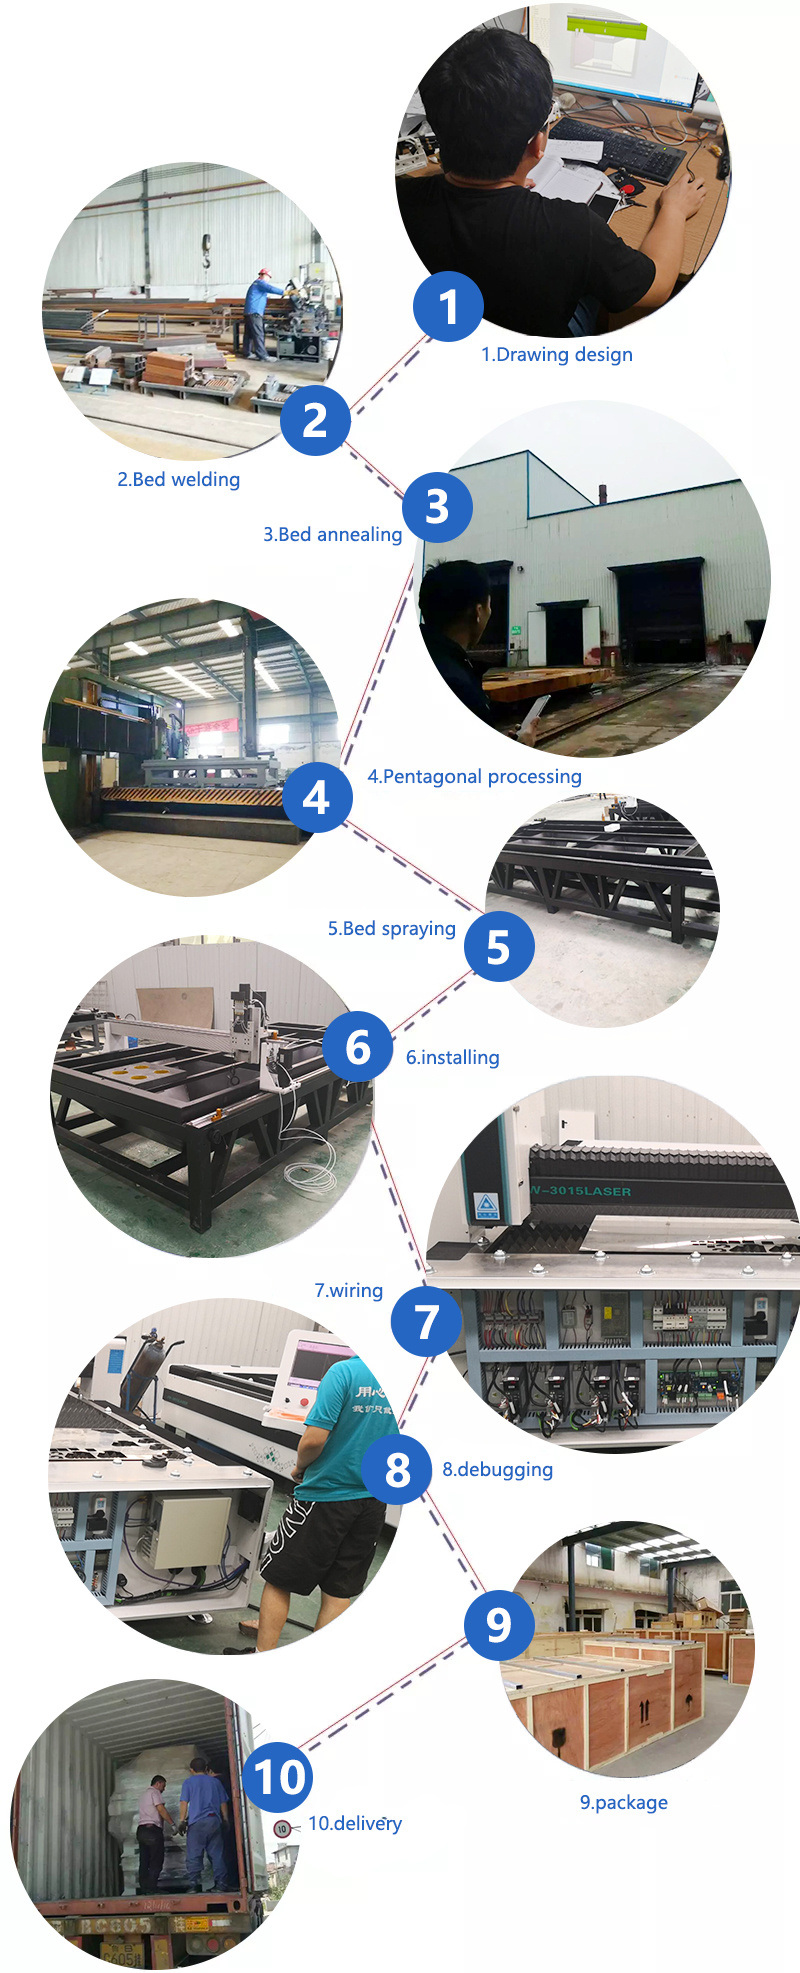 Hot Sale 1325 Metal and Nonmetal Laser Cutting Machine 150W CNC CO2 Laser Cutting Machines Price